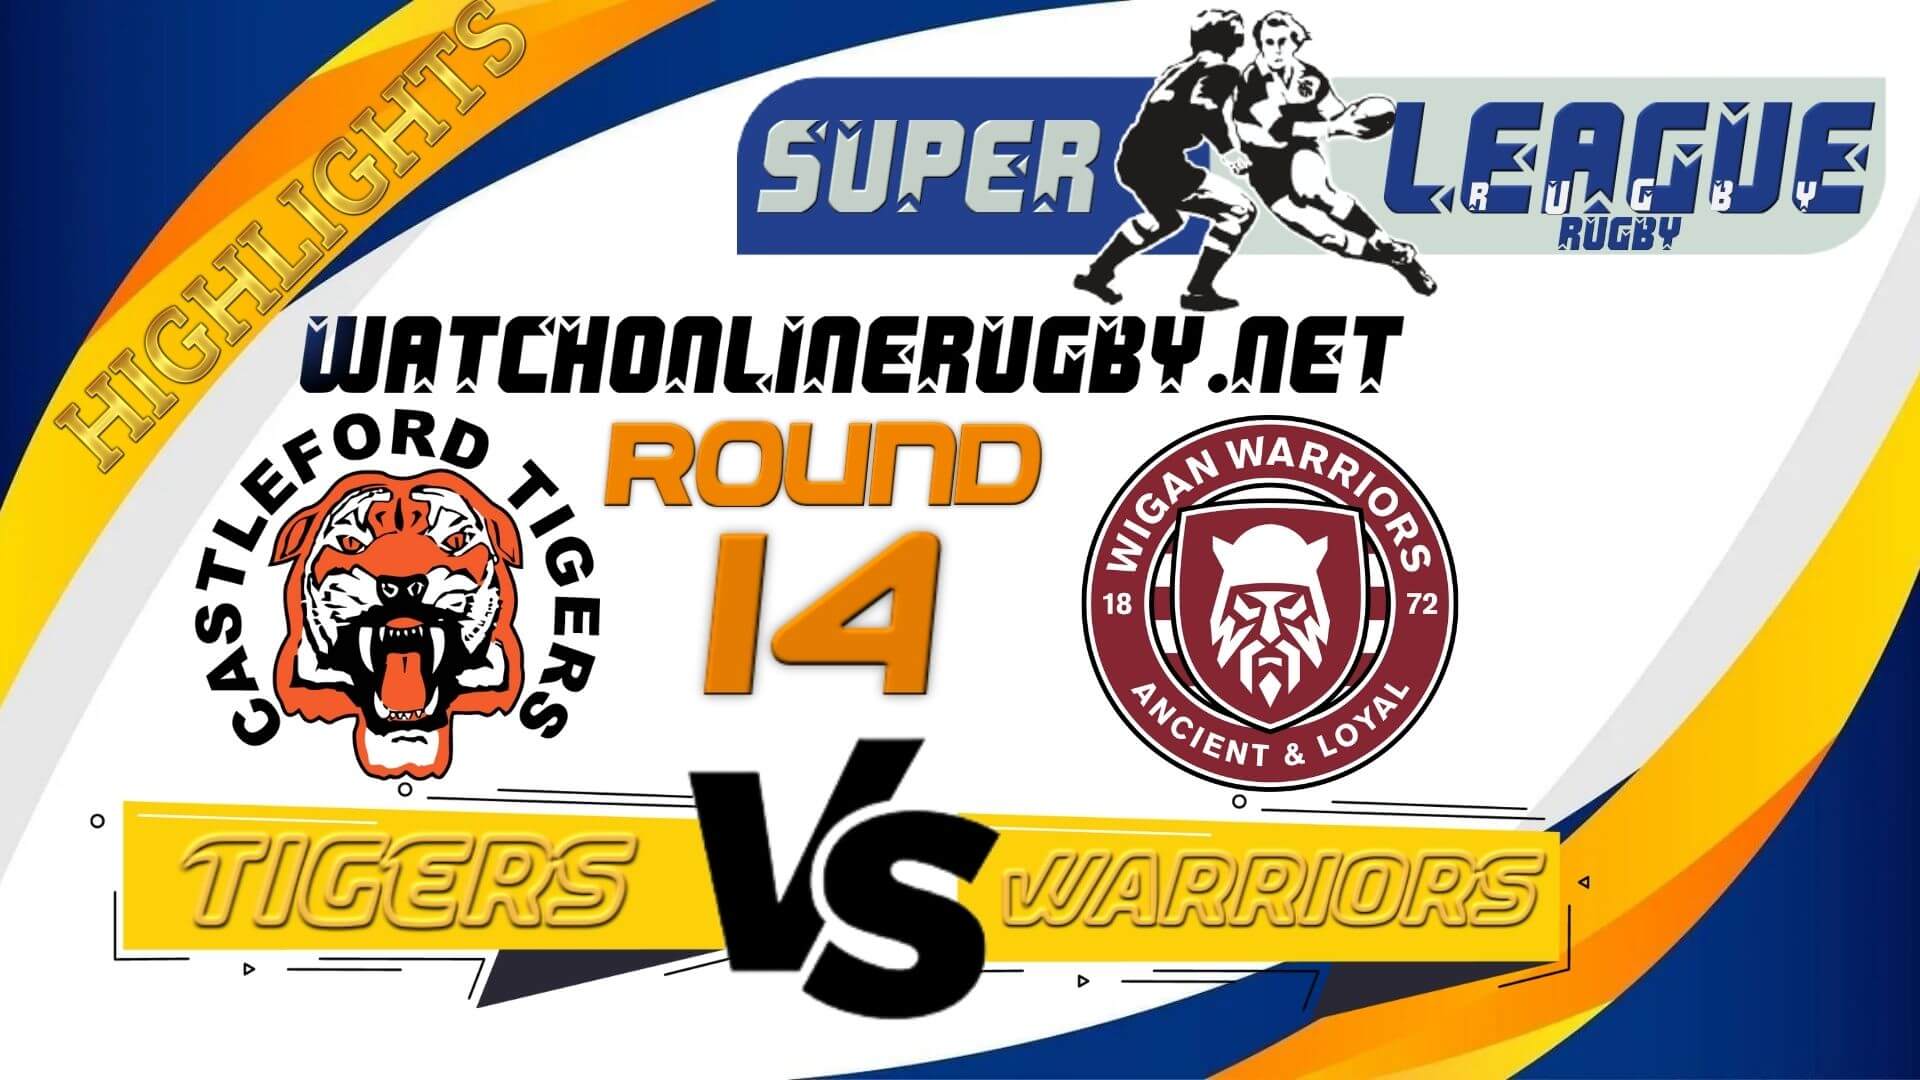 Castleford Tigers Vs Wigan Warriors Super League Rugby 2022 RD 14